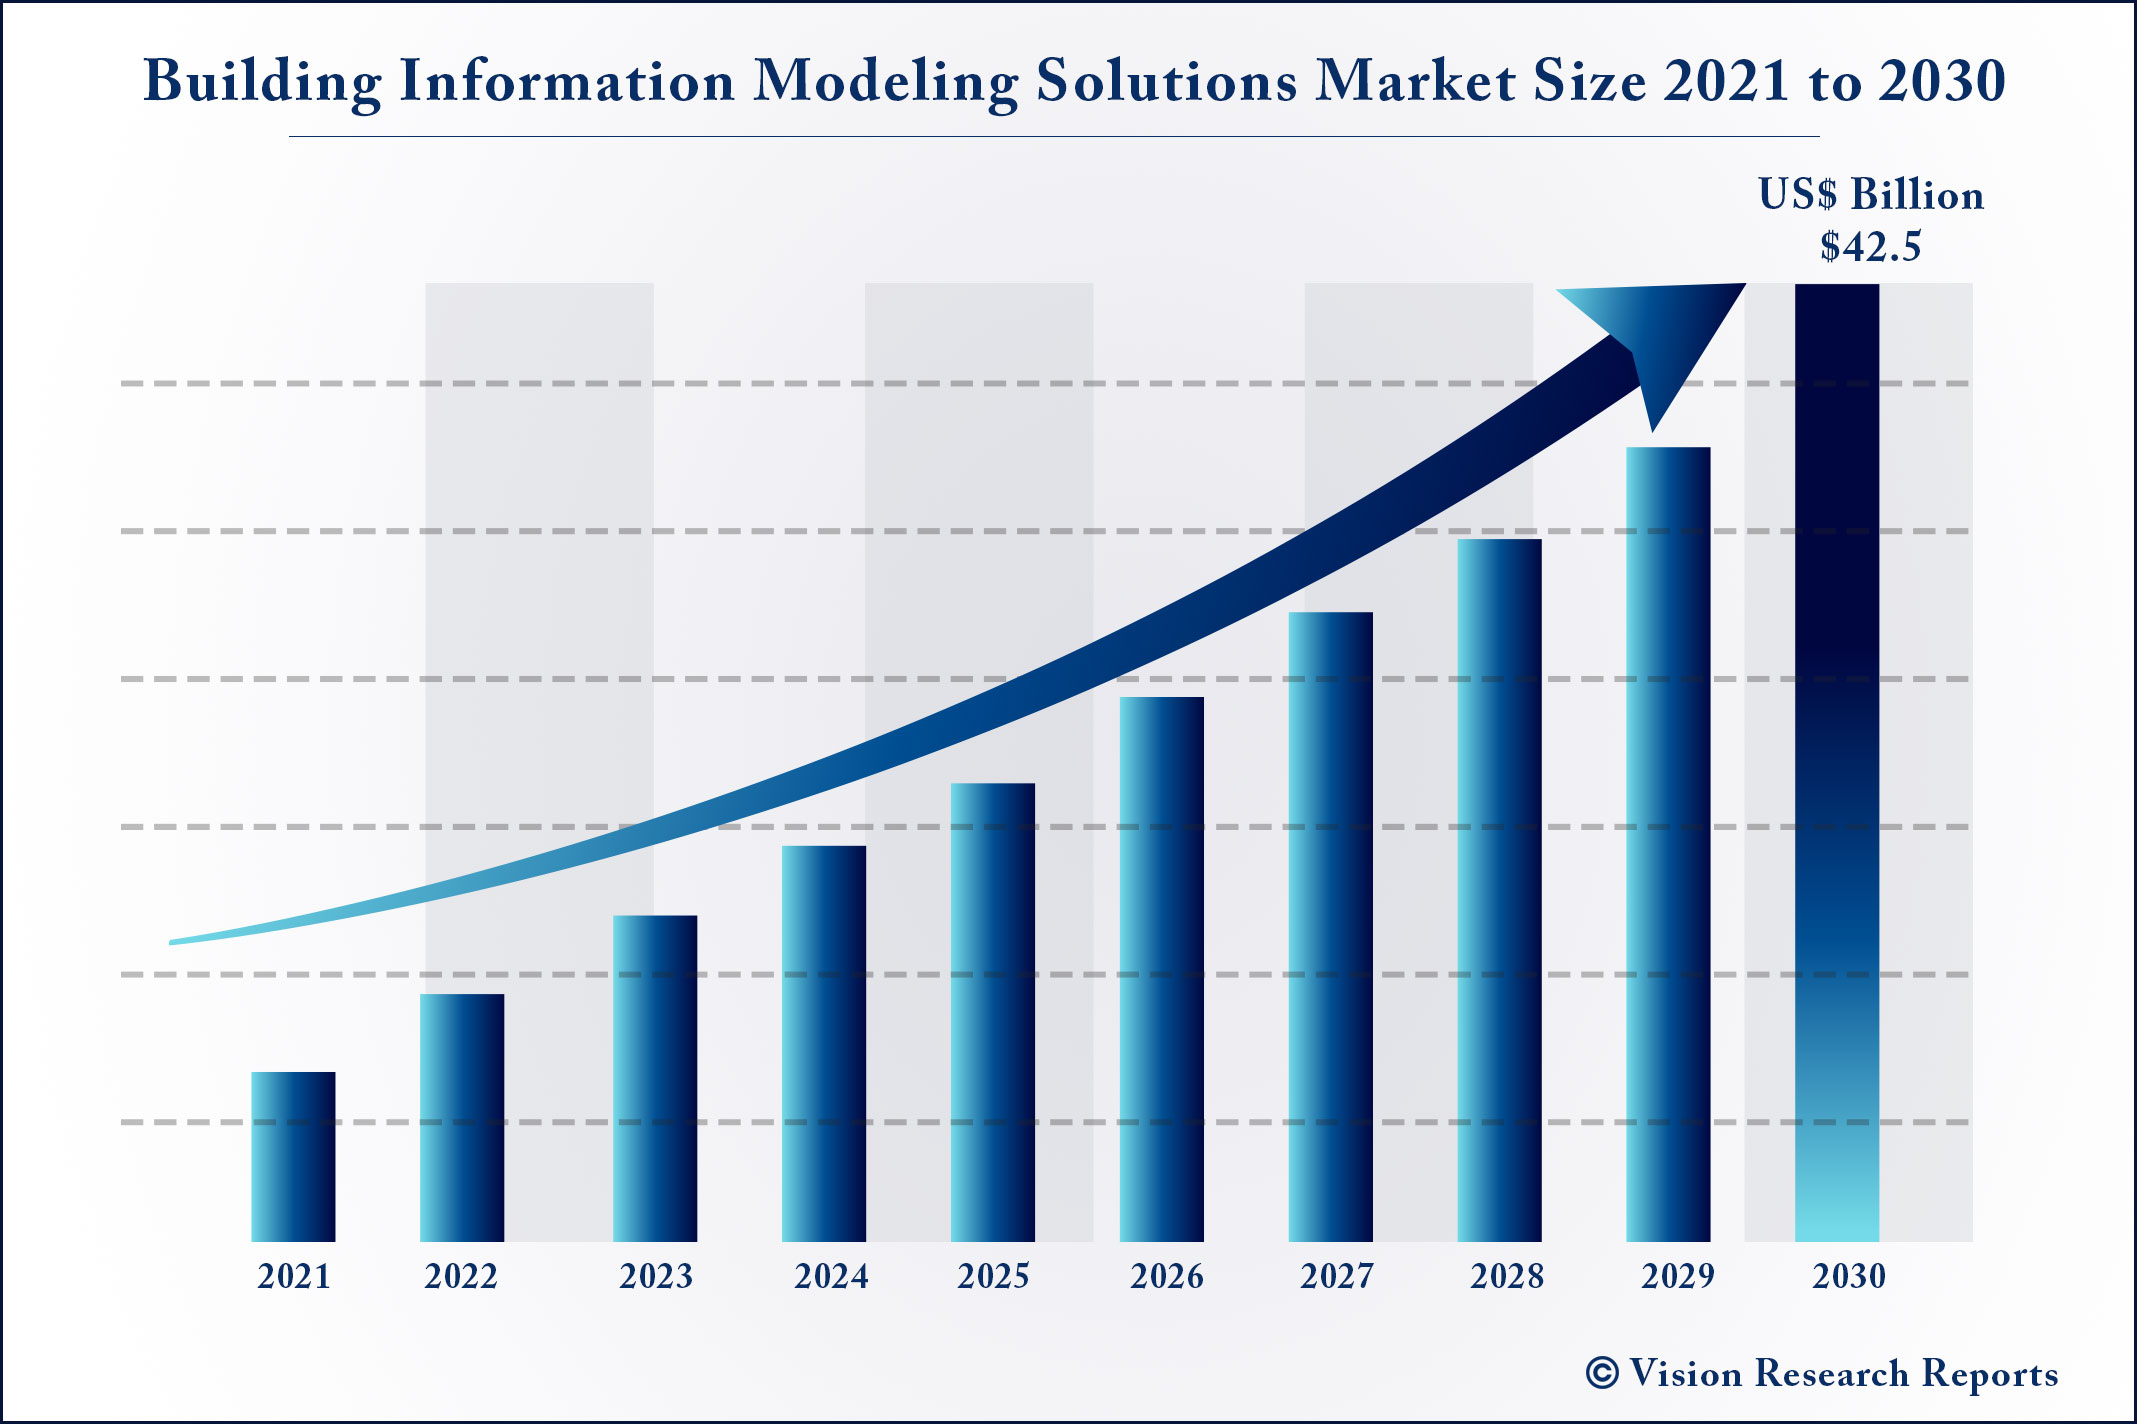 Building Information Modeling Solutions Market Size 2021 to 2030